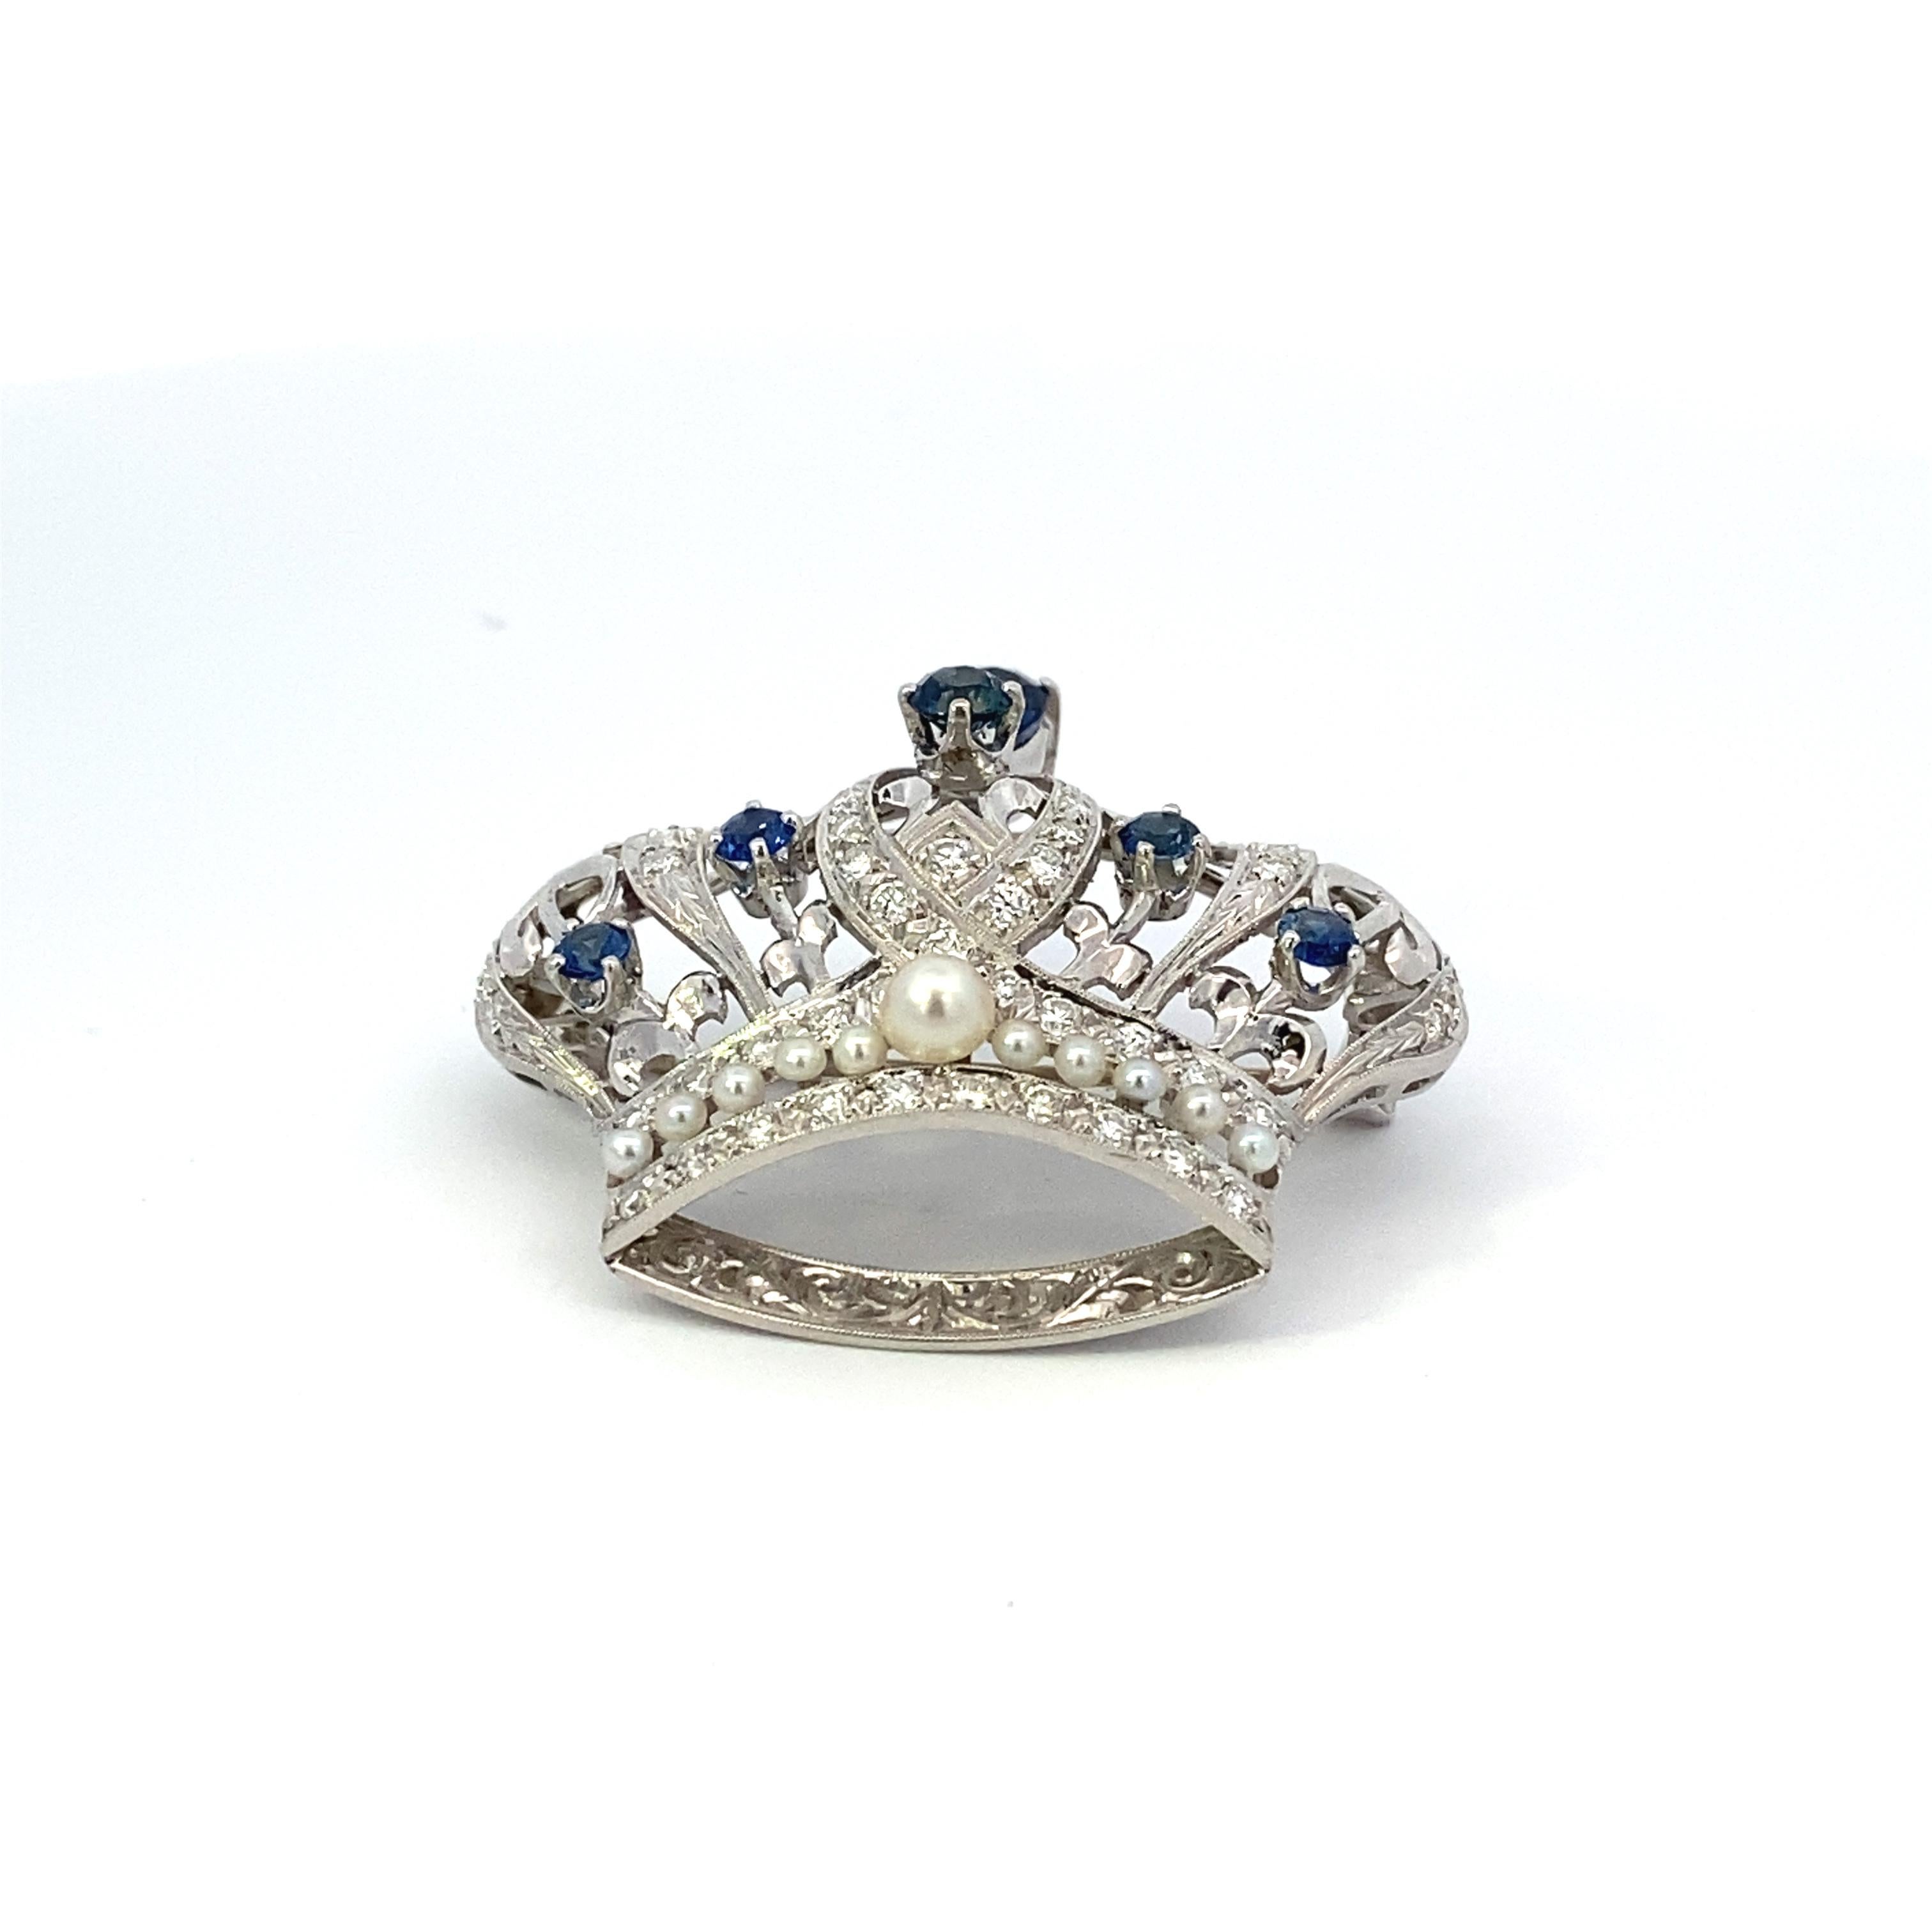 Edwardian-Styled platinum crown brooch with .73 carat pear-cut sapphire, 5 = .84 carat total weight round sapphires, .96 carat total weight F+ VS diamonds and 11 = AAA grade 2-4mm pearls. 40 mm wide x 35 mm high. Safety on pin.